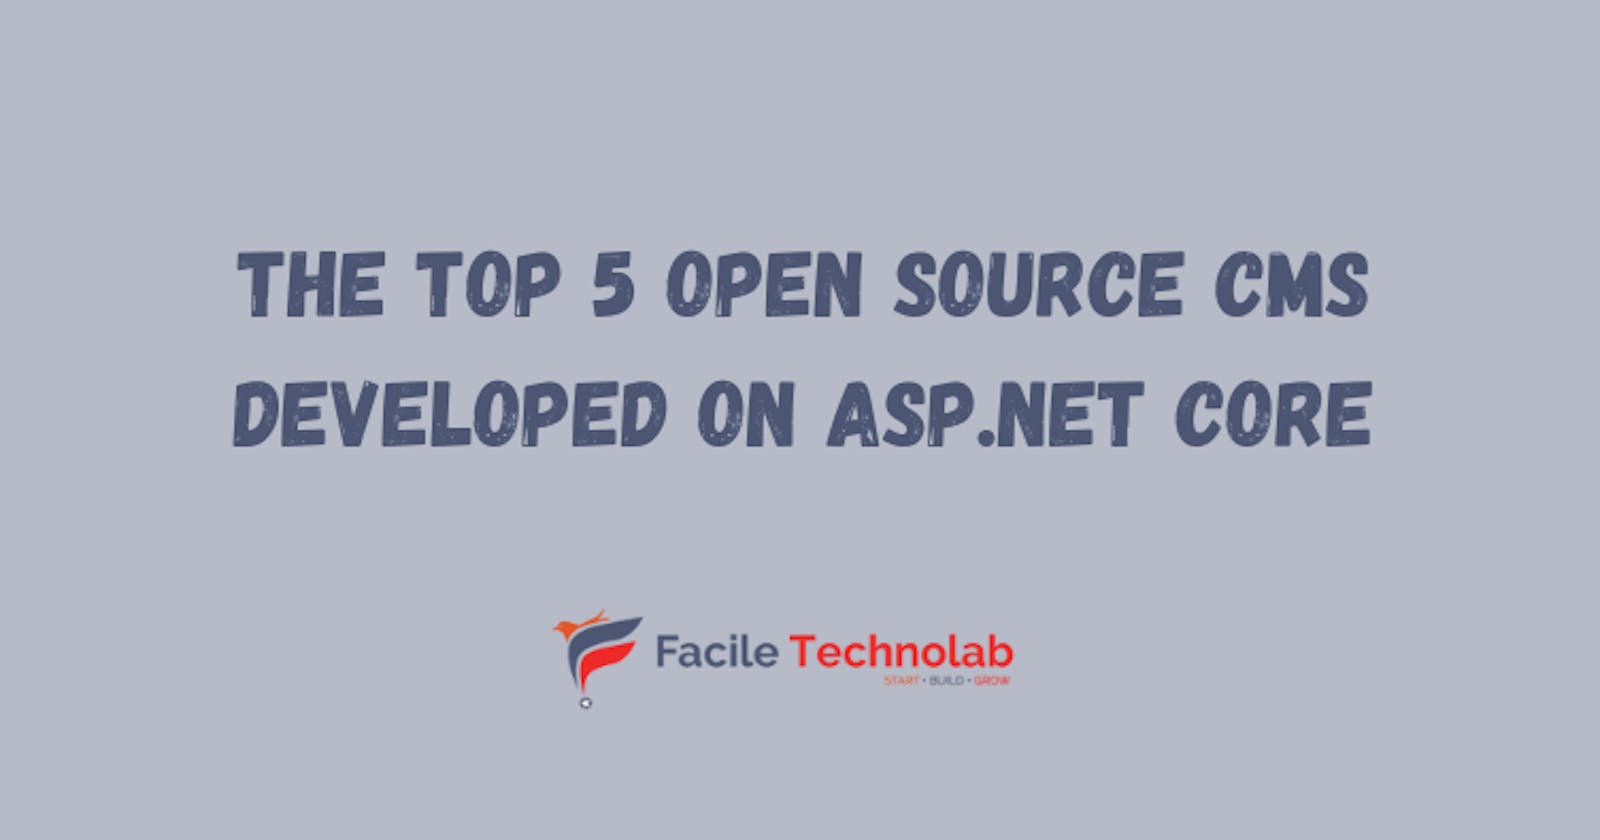 The Top 5 Open Source CMS Developed on ASP.NET Core